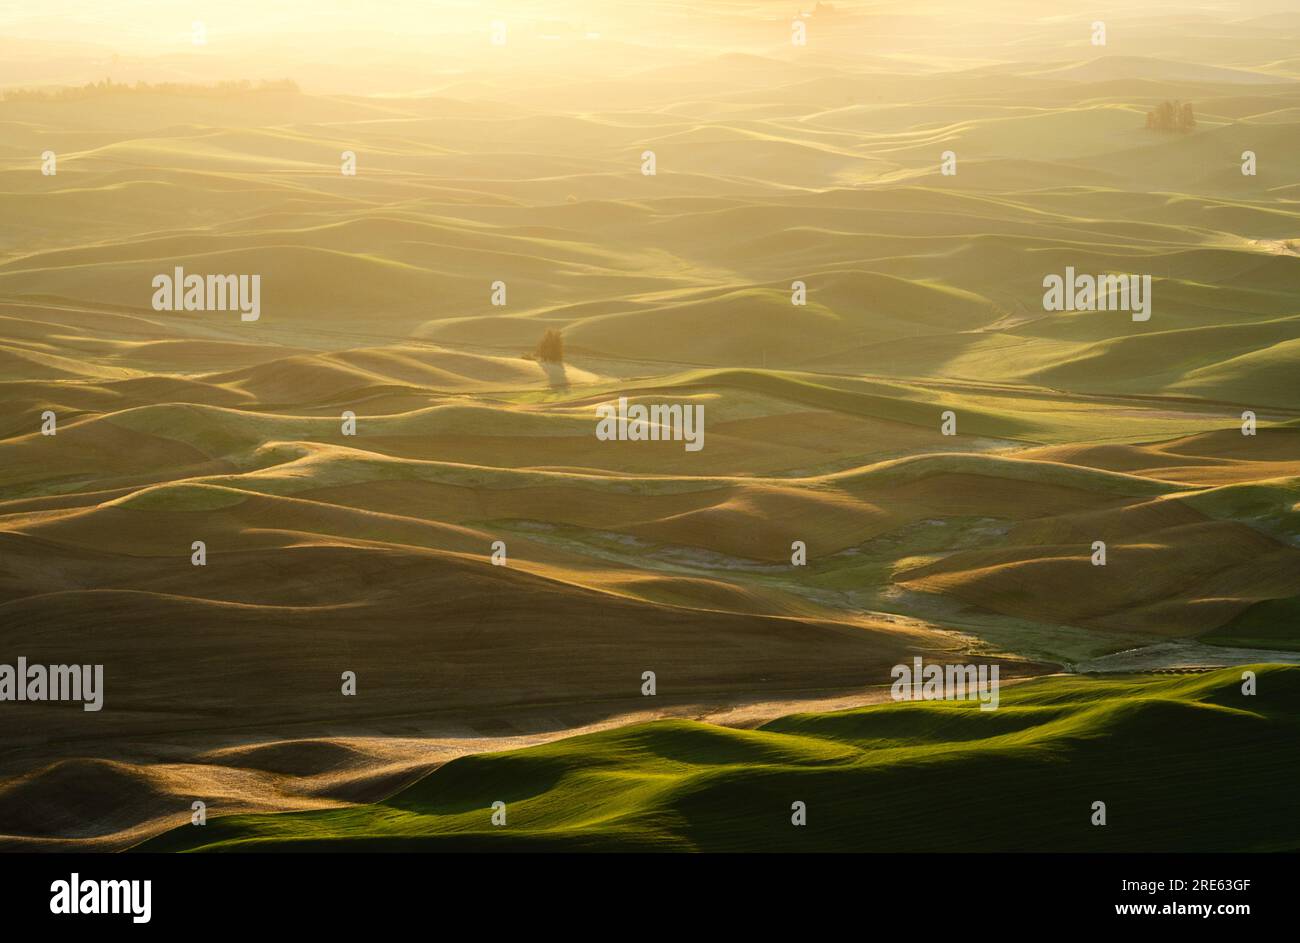 Aerial view of rolling hills in early morning light, seen from Steptoe Butte. Steptoe Butte State Park, Washington, USA. Stock Photo